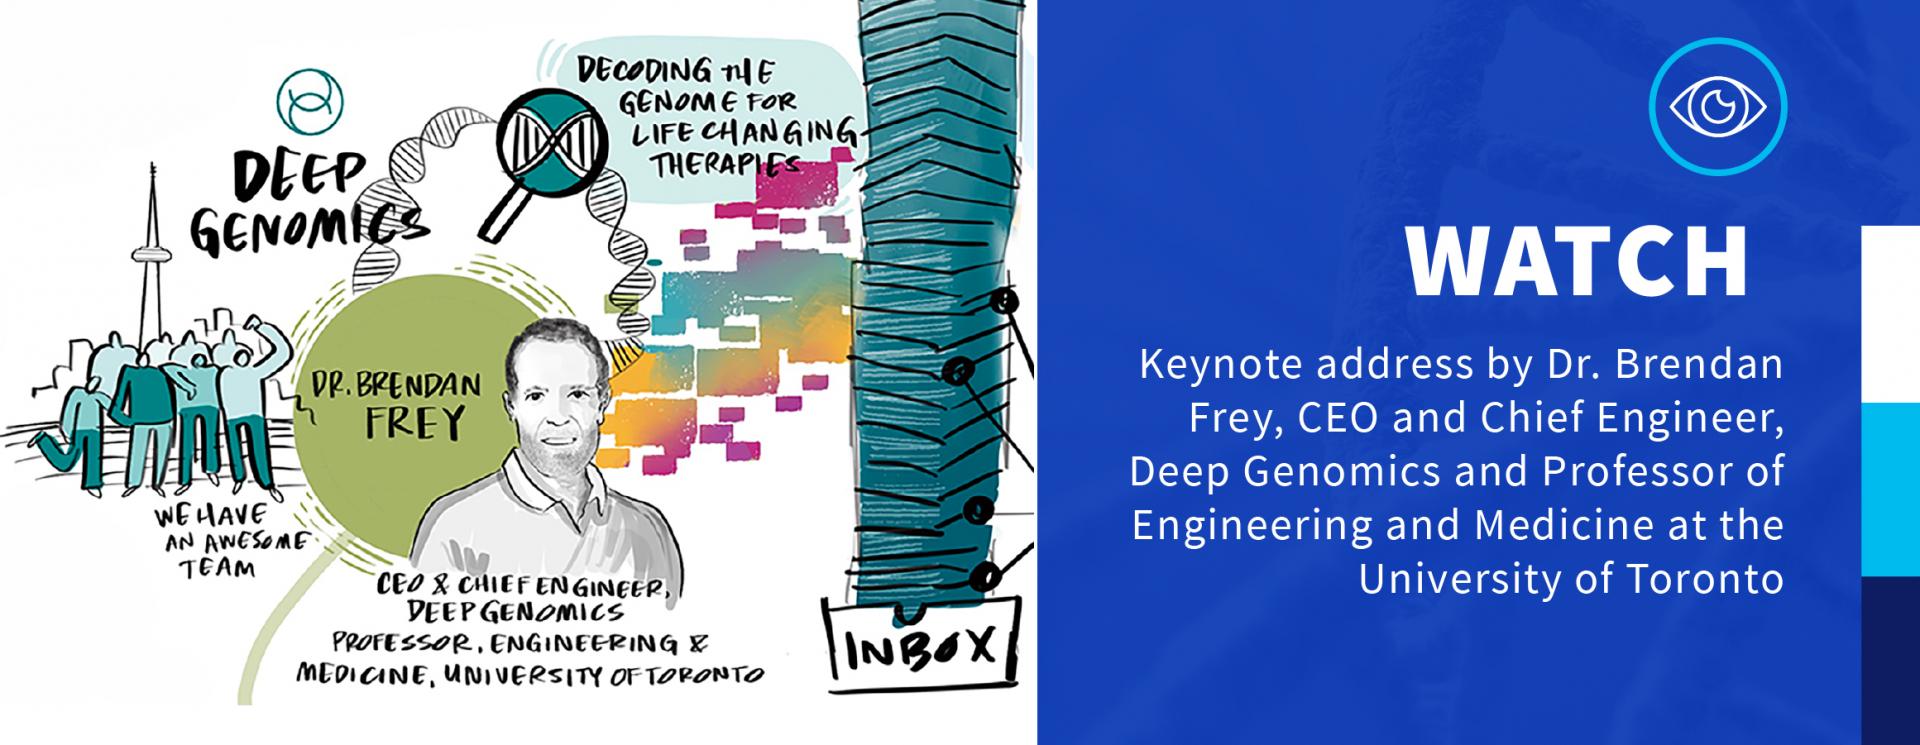 Watch – Keynote address by Dr. Brendan Frey, CEO and Chief Engineer, Deep Genomics and Professor of Engineering and Medicine at the University of Toronto.